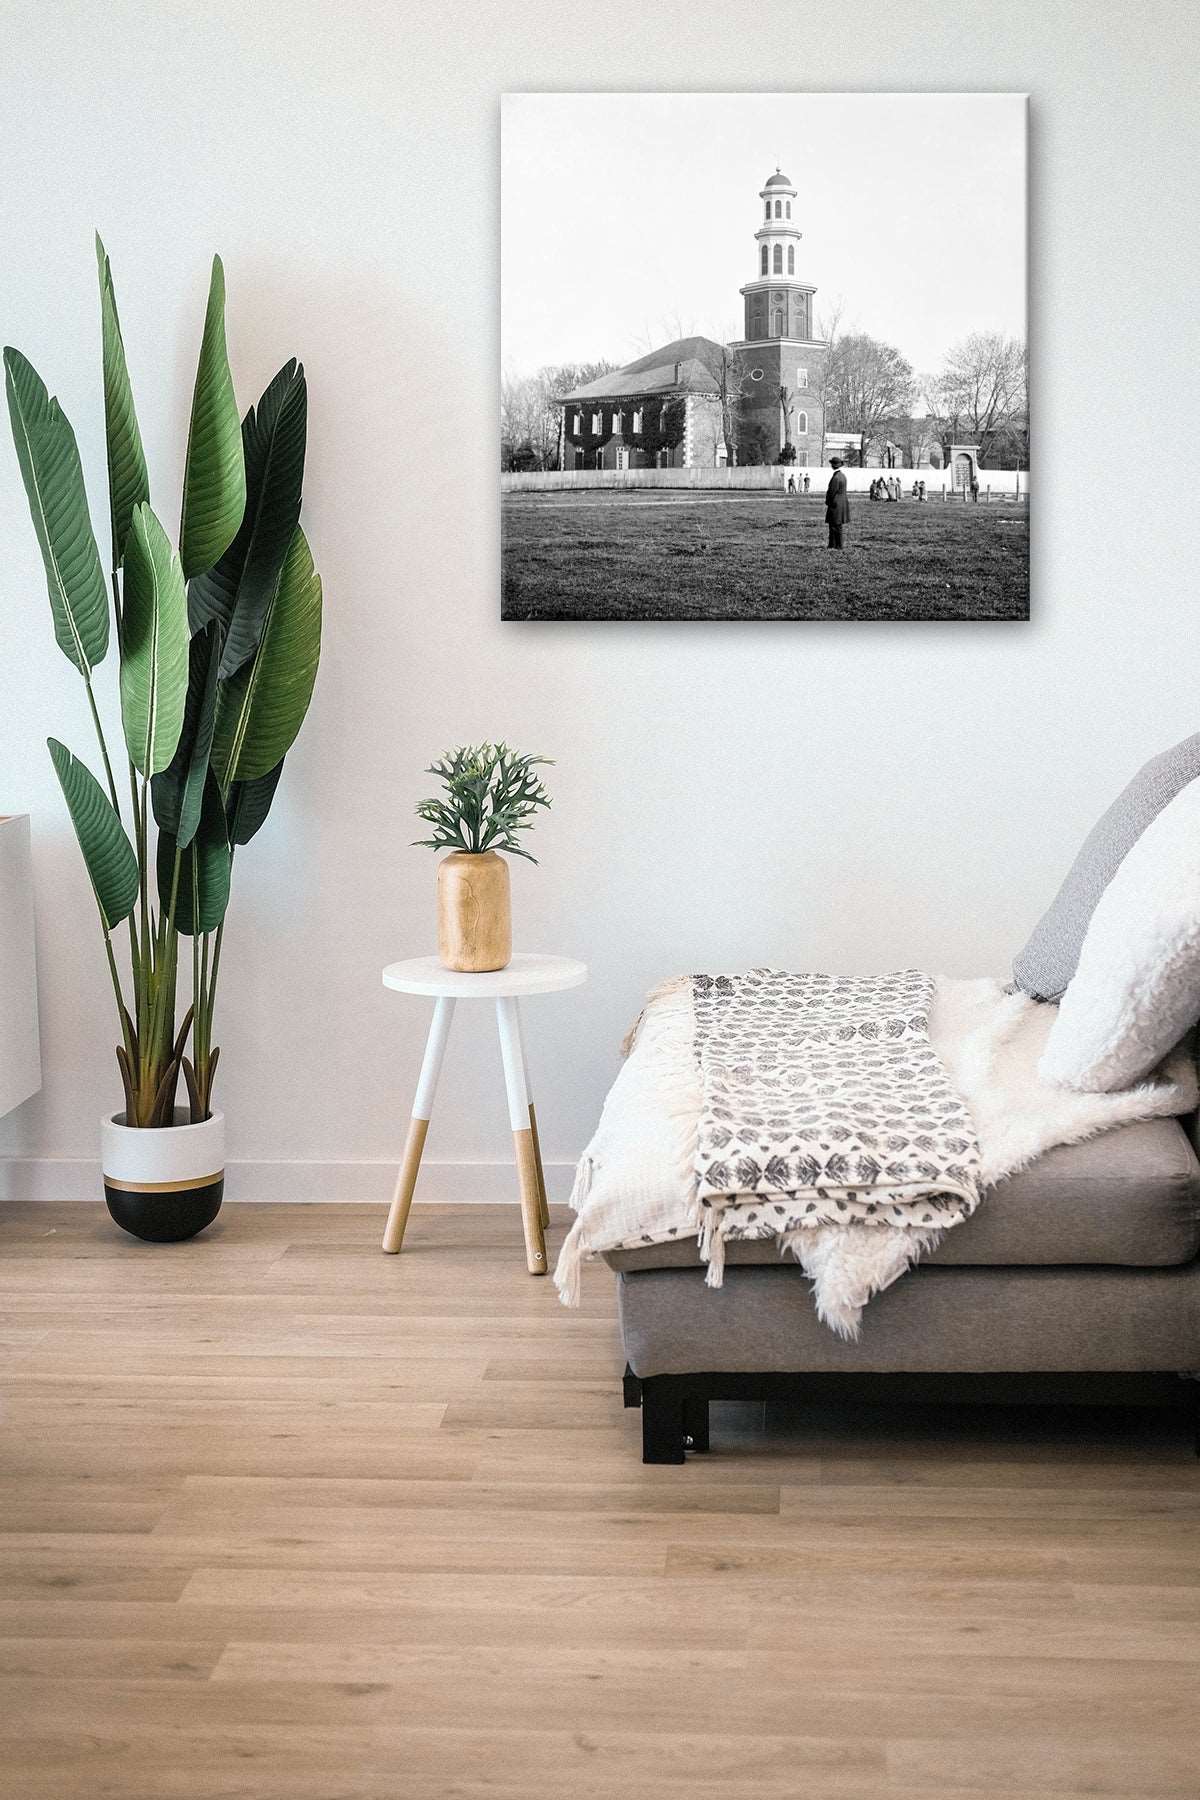 A vintage photograph of Alexandria's Christ Church, printed on canvas and hanging in a living room